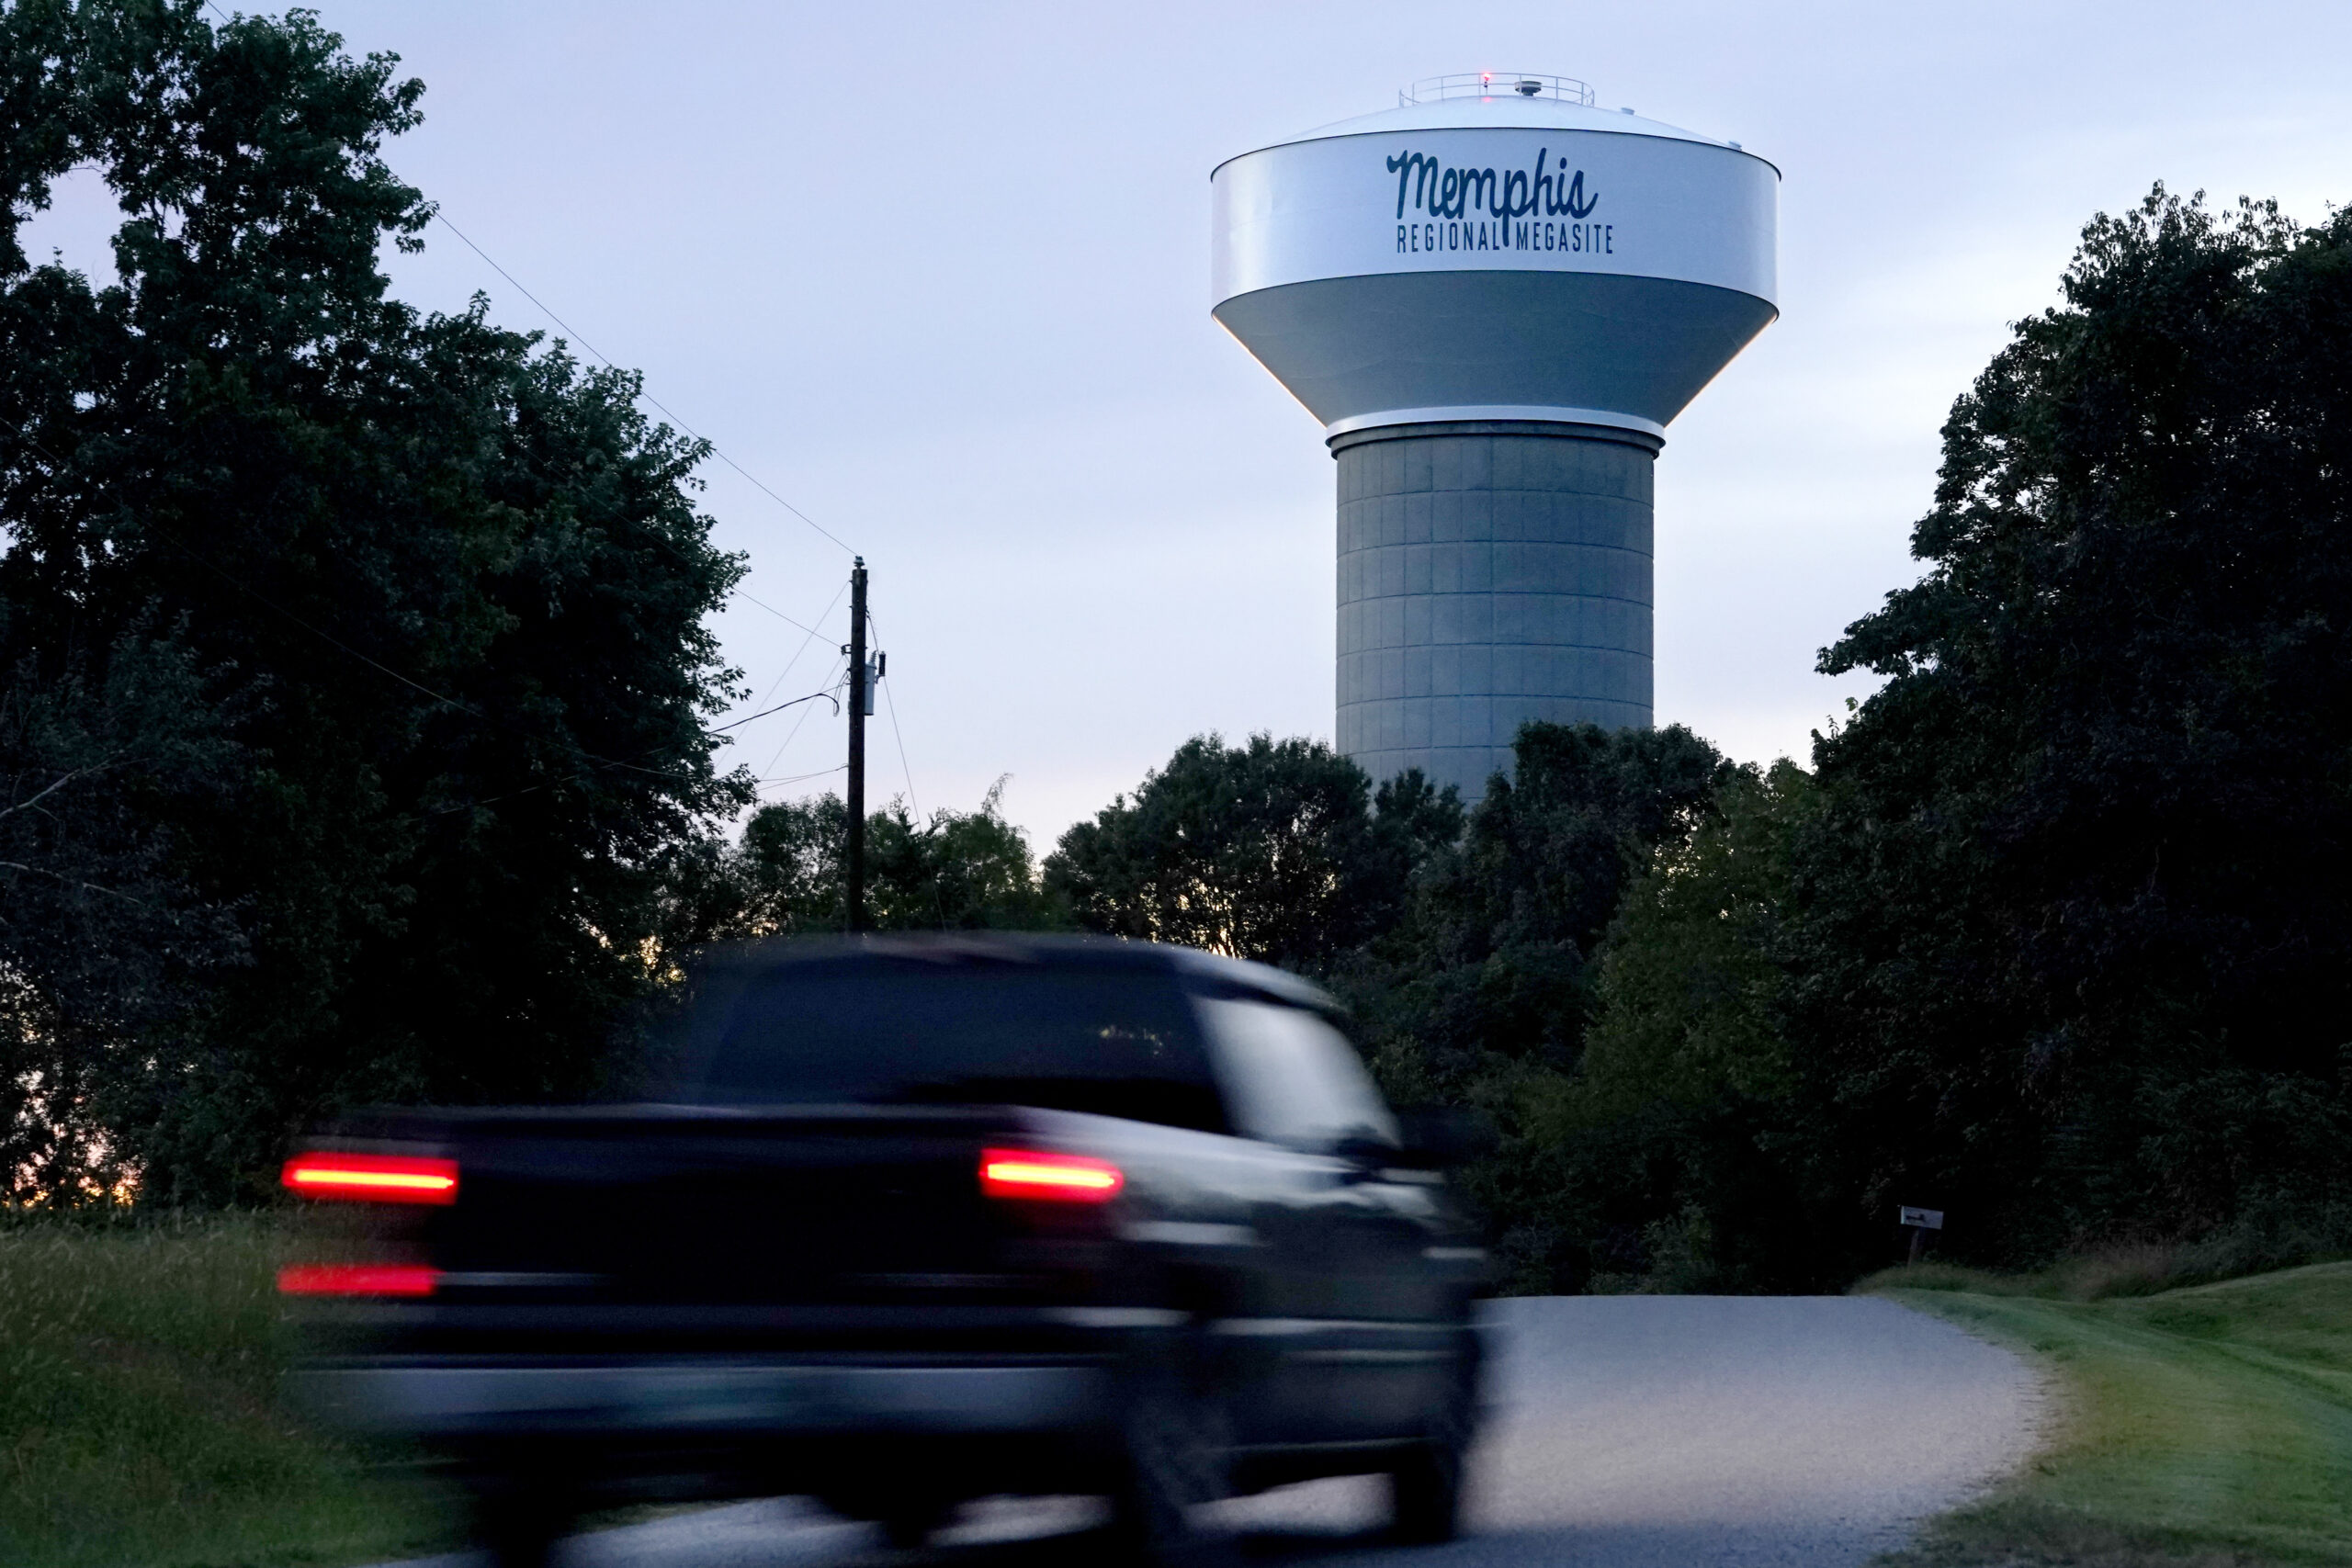 A truck drives down a rural road near a water tower marking the location of the Memphis Regional Megasite on Sept. 24, 2021, in Stanton, Tenn. Ford Motor Co. and SK Innovation of South Korea plan to build three new electric-vehicle battery factories and an auto assembly plant by 2025 in Tennessee and Kentucky. The industrial site in Stanton will be the location for a factory to produce electric F-Series pickups and a battery factory. (AP Photo/Mark Humphrey)